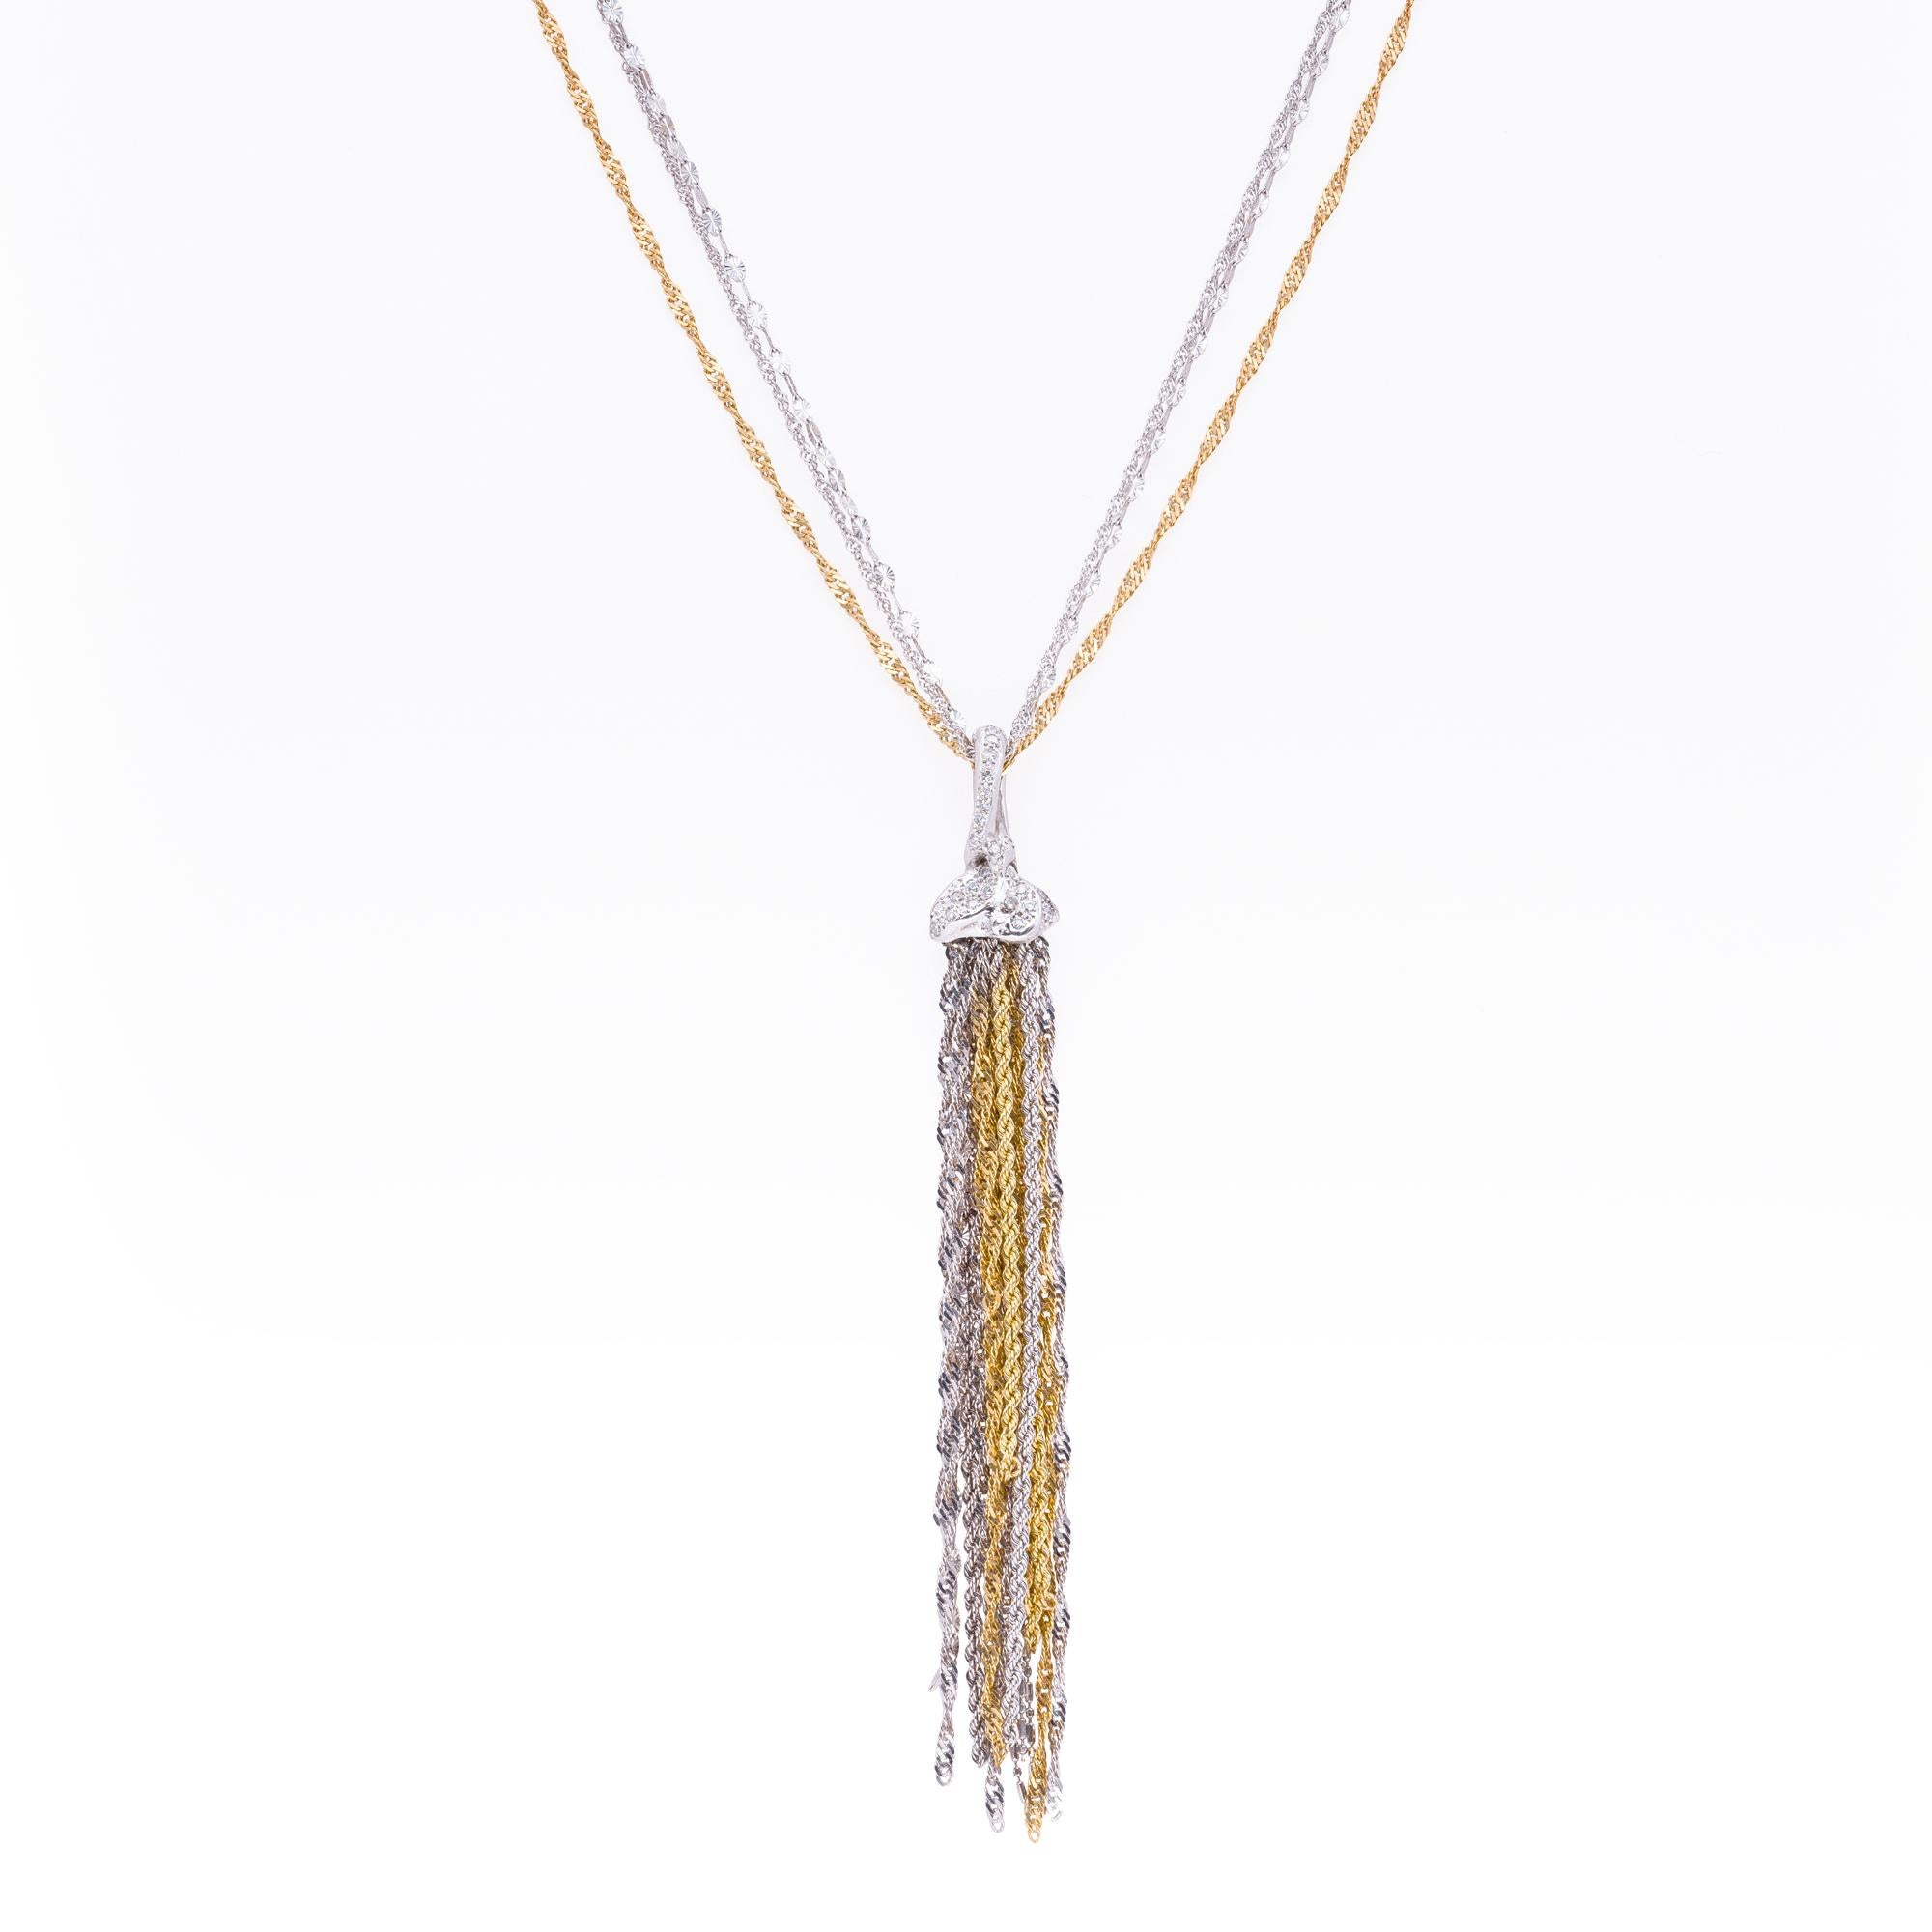 A Necklace from d'Avossa Collection A Thousand Chains
Made in white and yellow gold, the mix of different chains has a special brightness, 
while the fringe and the diamonds give to this necklace a sophisticated touch of movement and elegance  
A